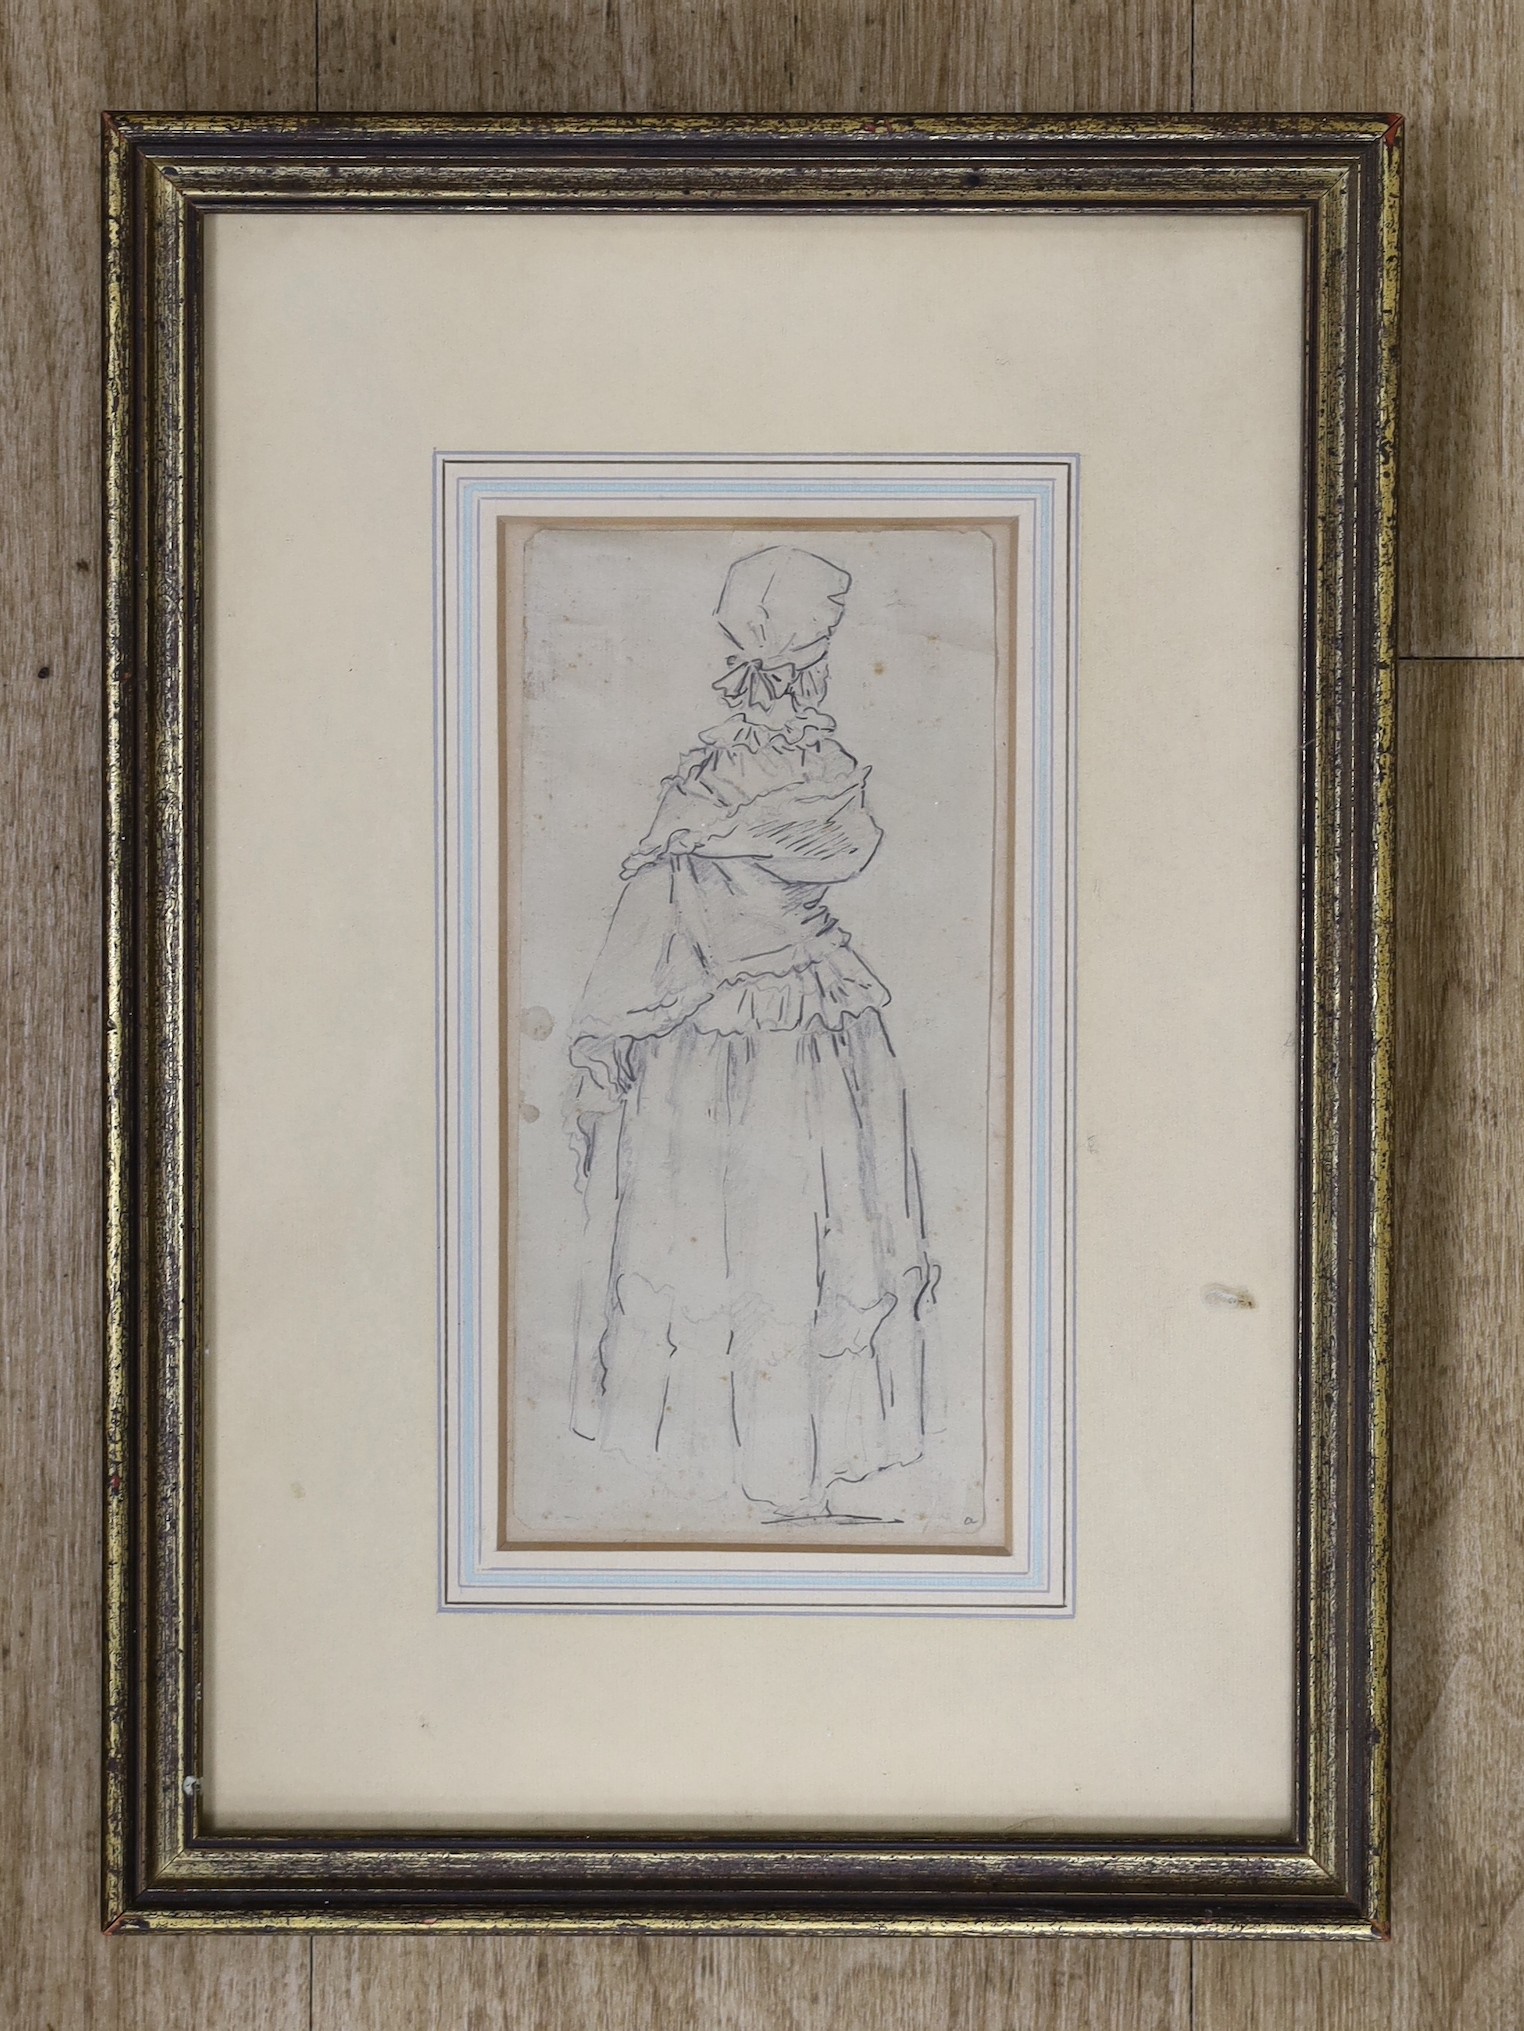 18th century English School, pen and ink, Sketch from Life of a woman's costume, 20 x 9.5cm